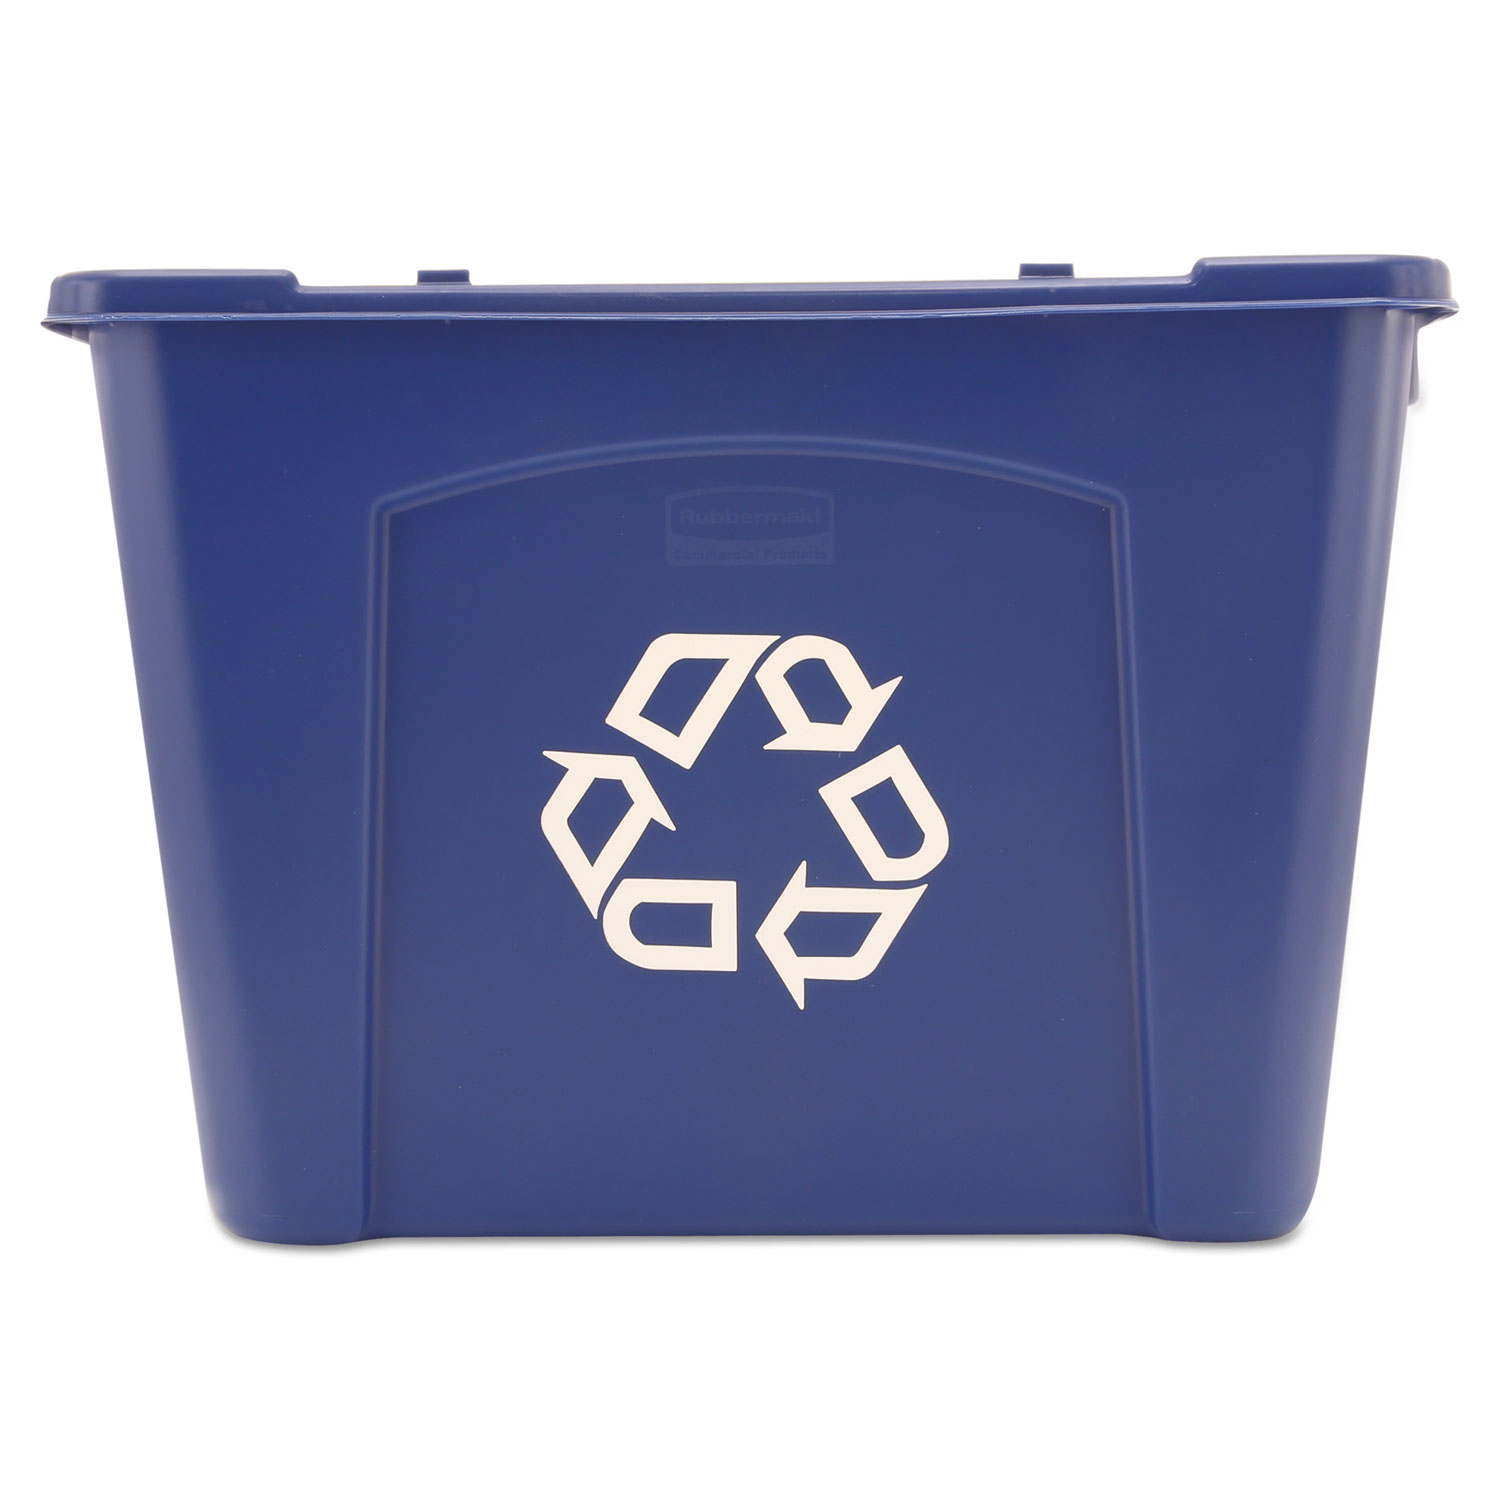  Rubbermaid Commercial FG571473BLUE Stacking Recycle Bin, Rectangular, Polyethylene, 14 gal, Blue (RCP571473BE) 